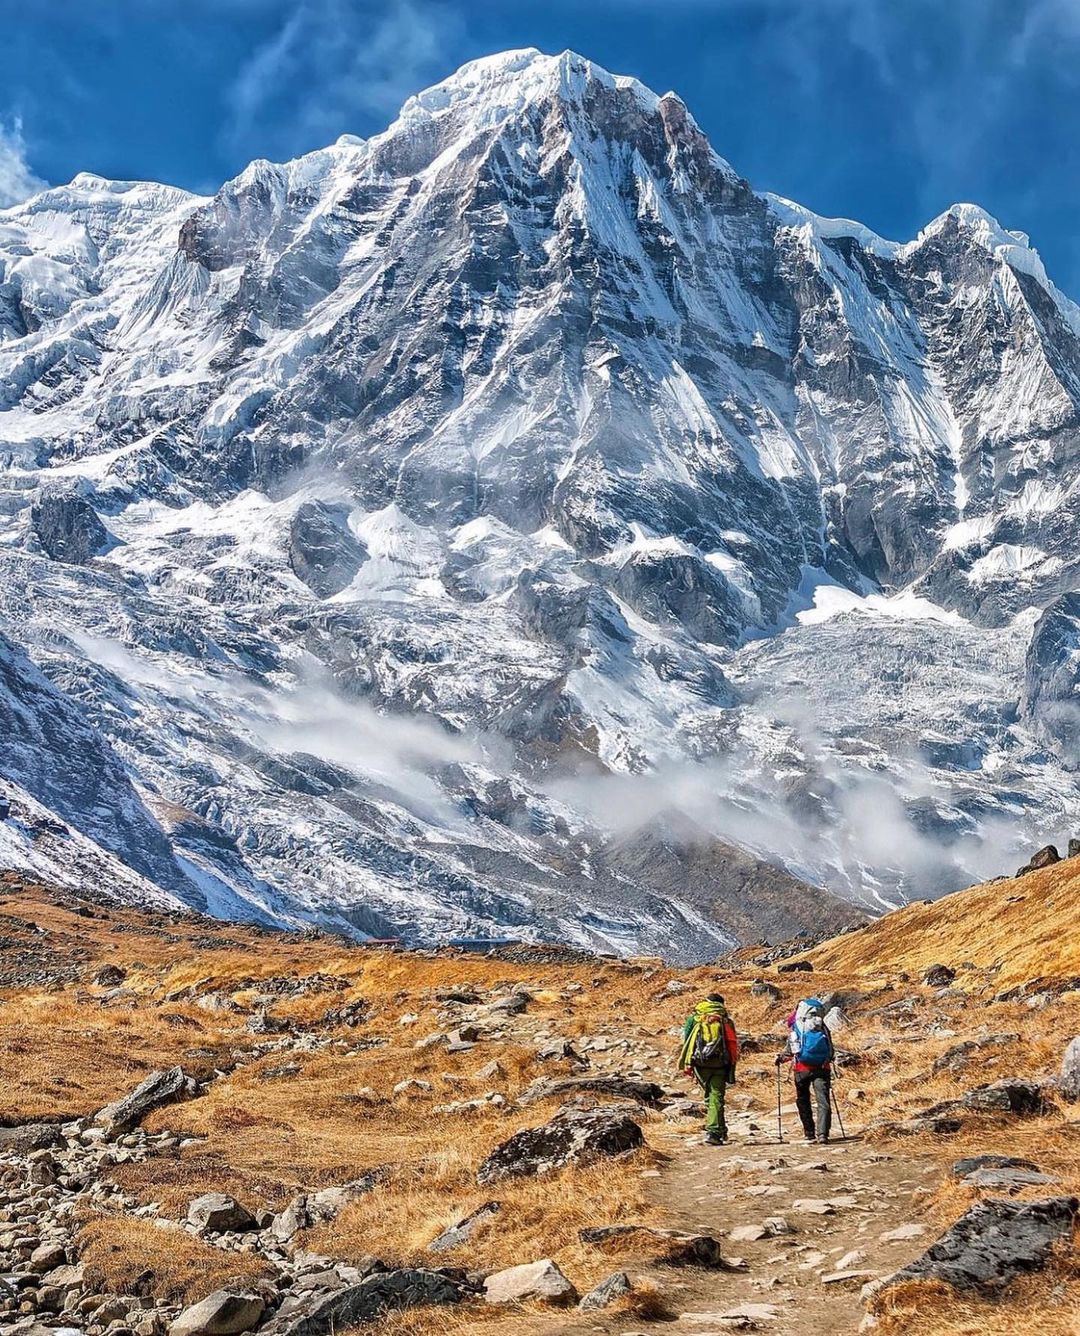 Excellent Reviews from our Happy Customer for Trekking in Nepal 